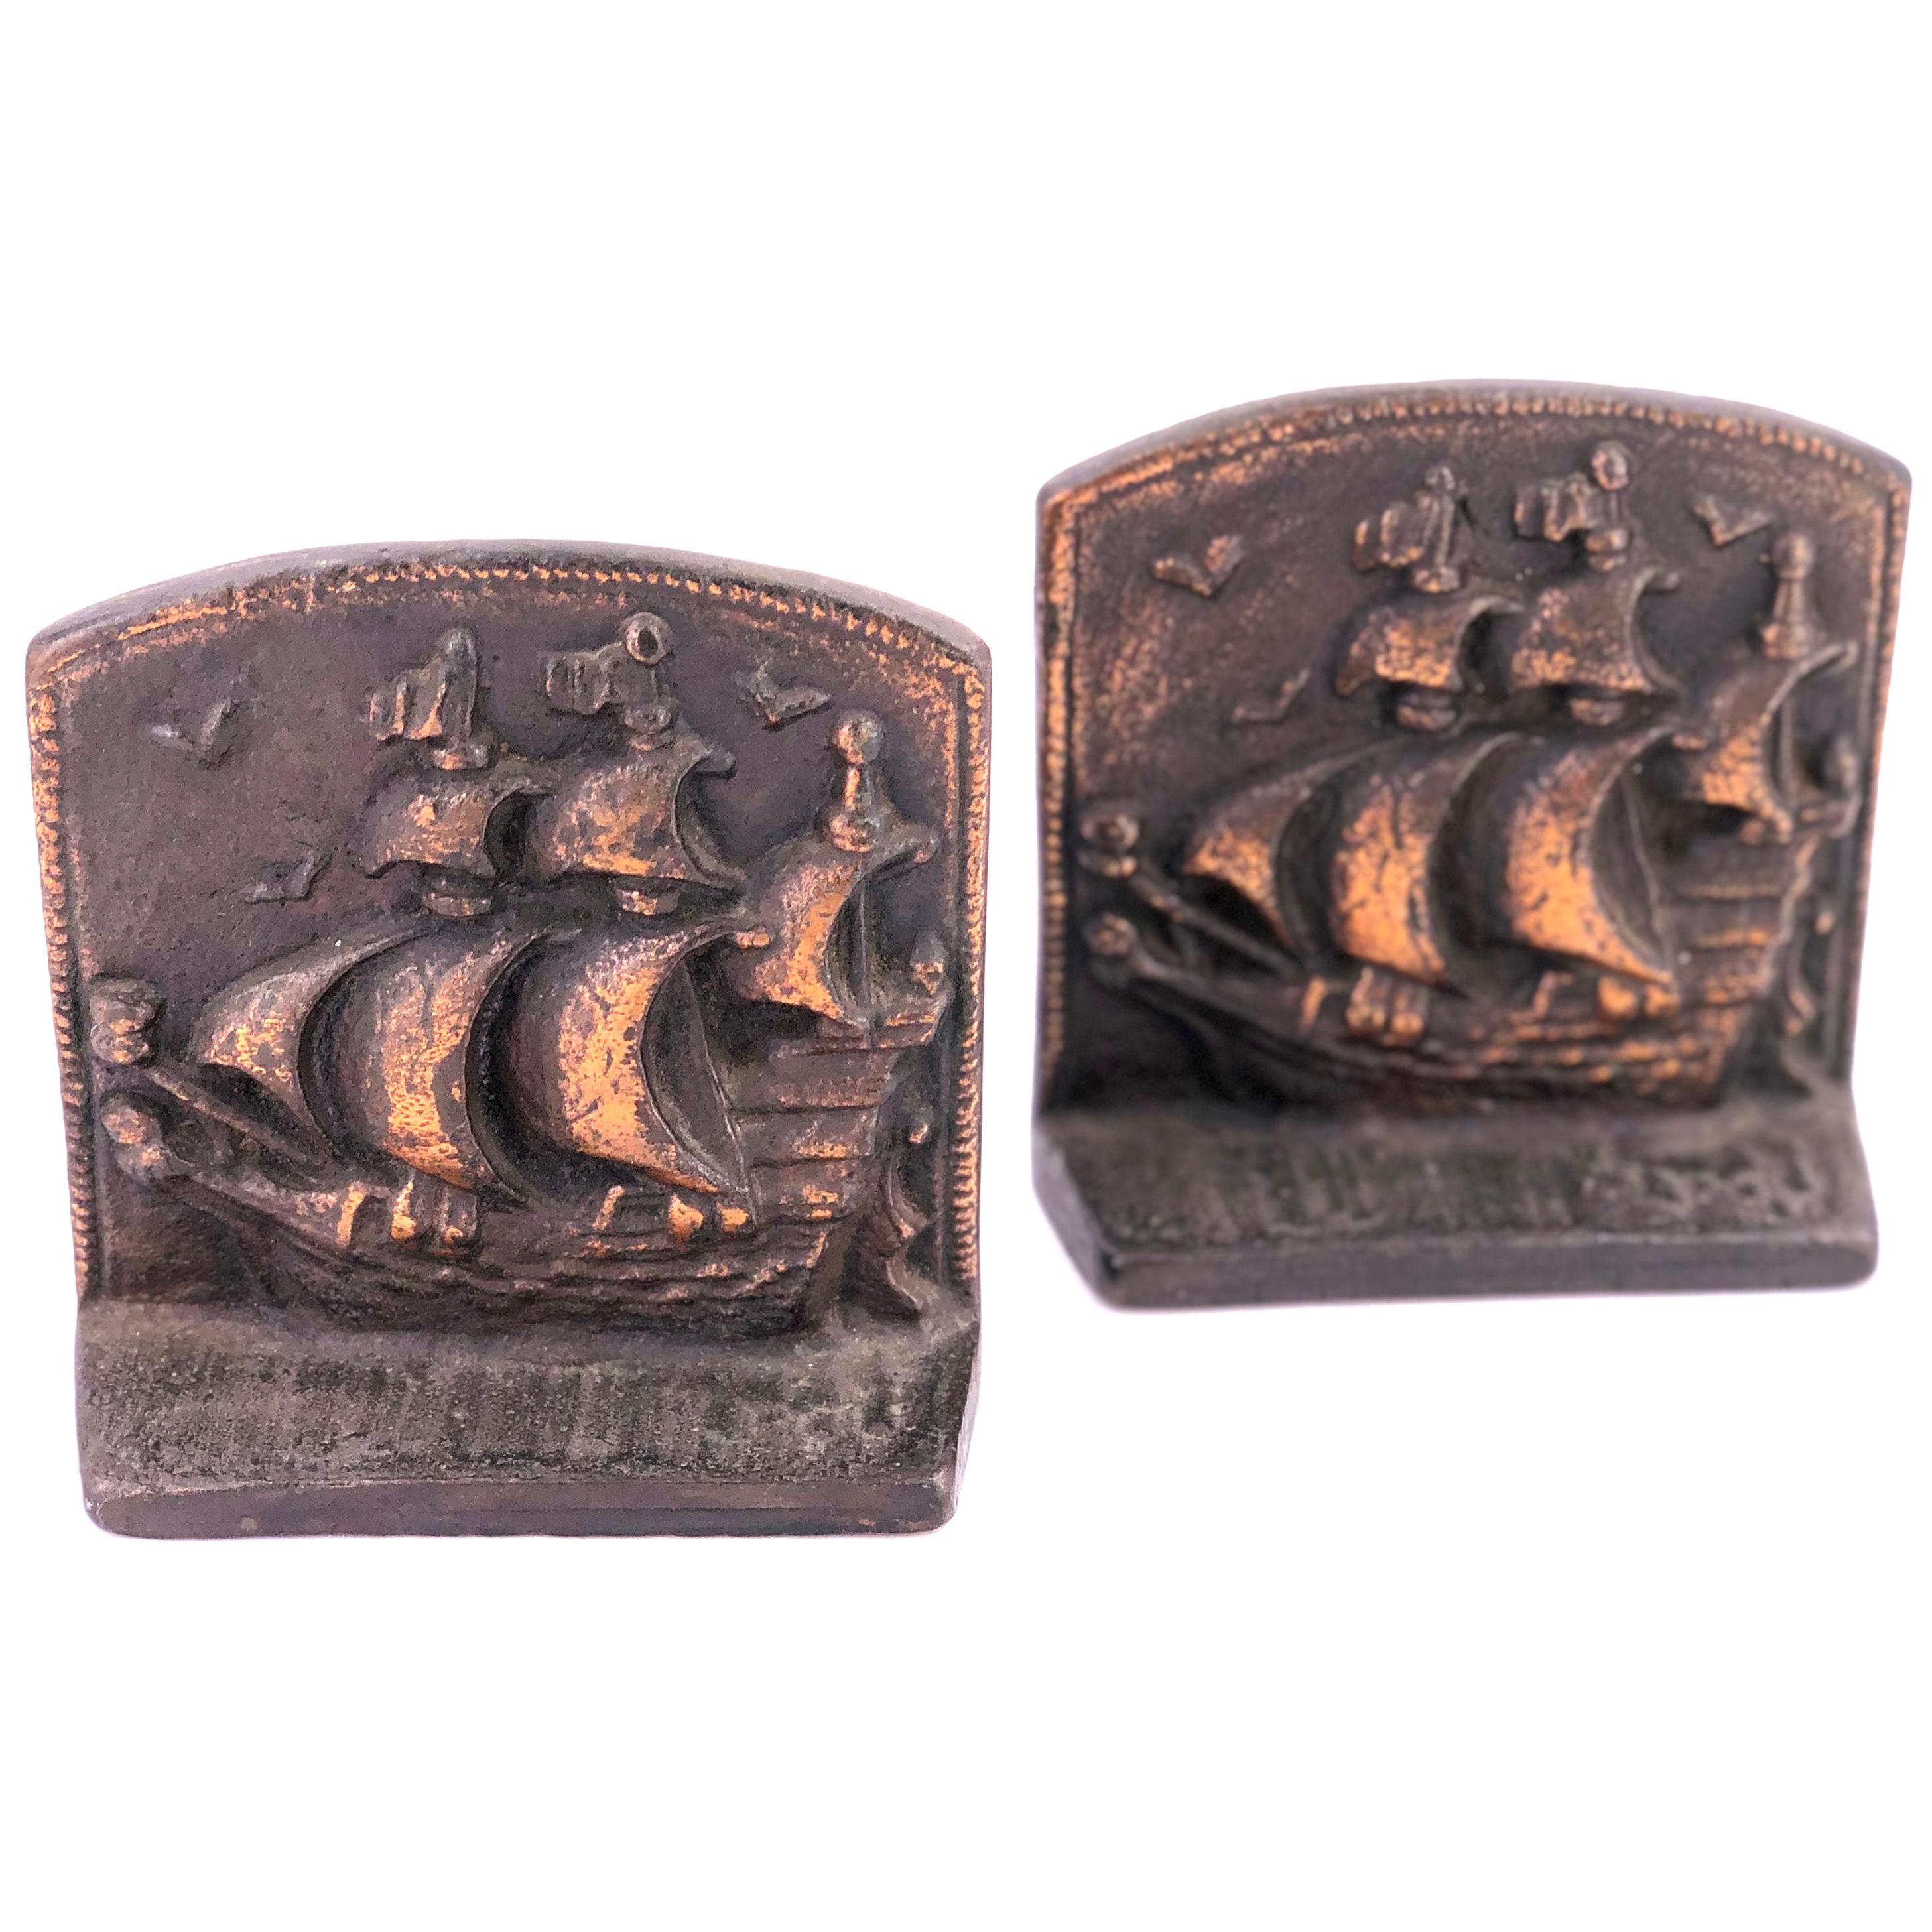 Antique Pair of Solid Bronze Bookends Galley by Novelty Manufacturing Co.